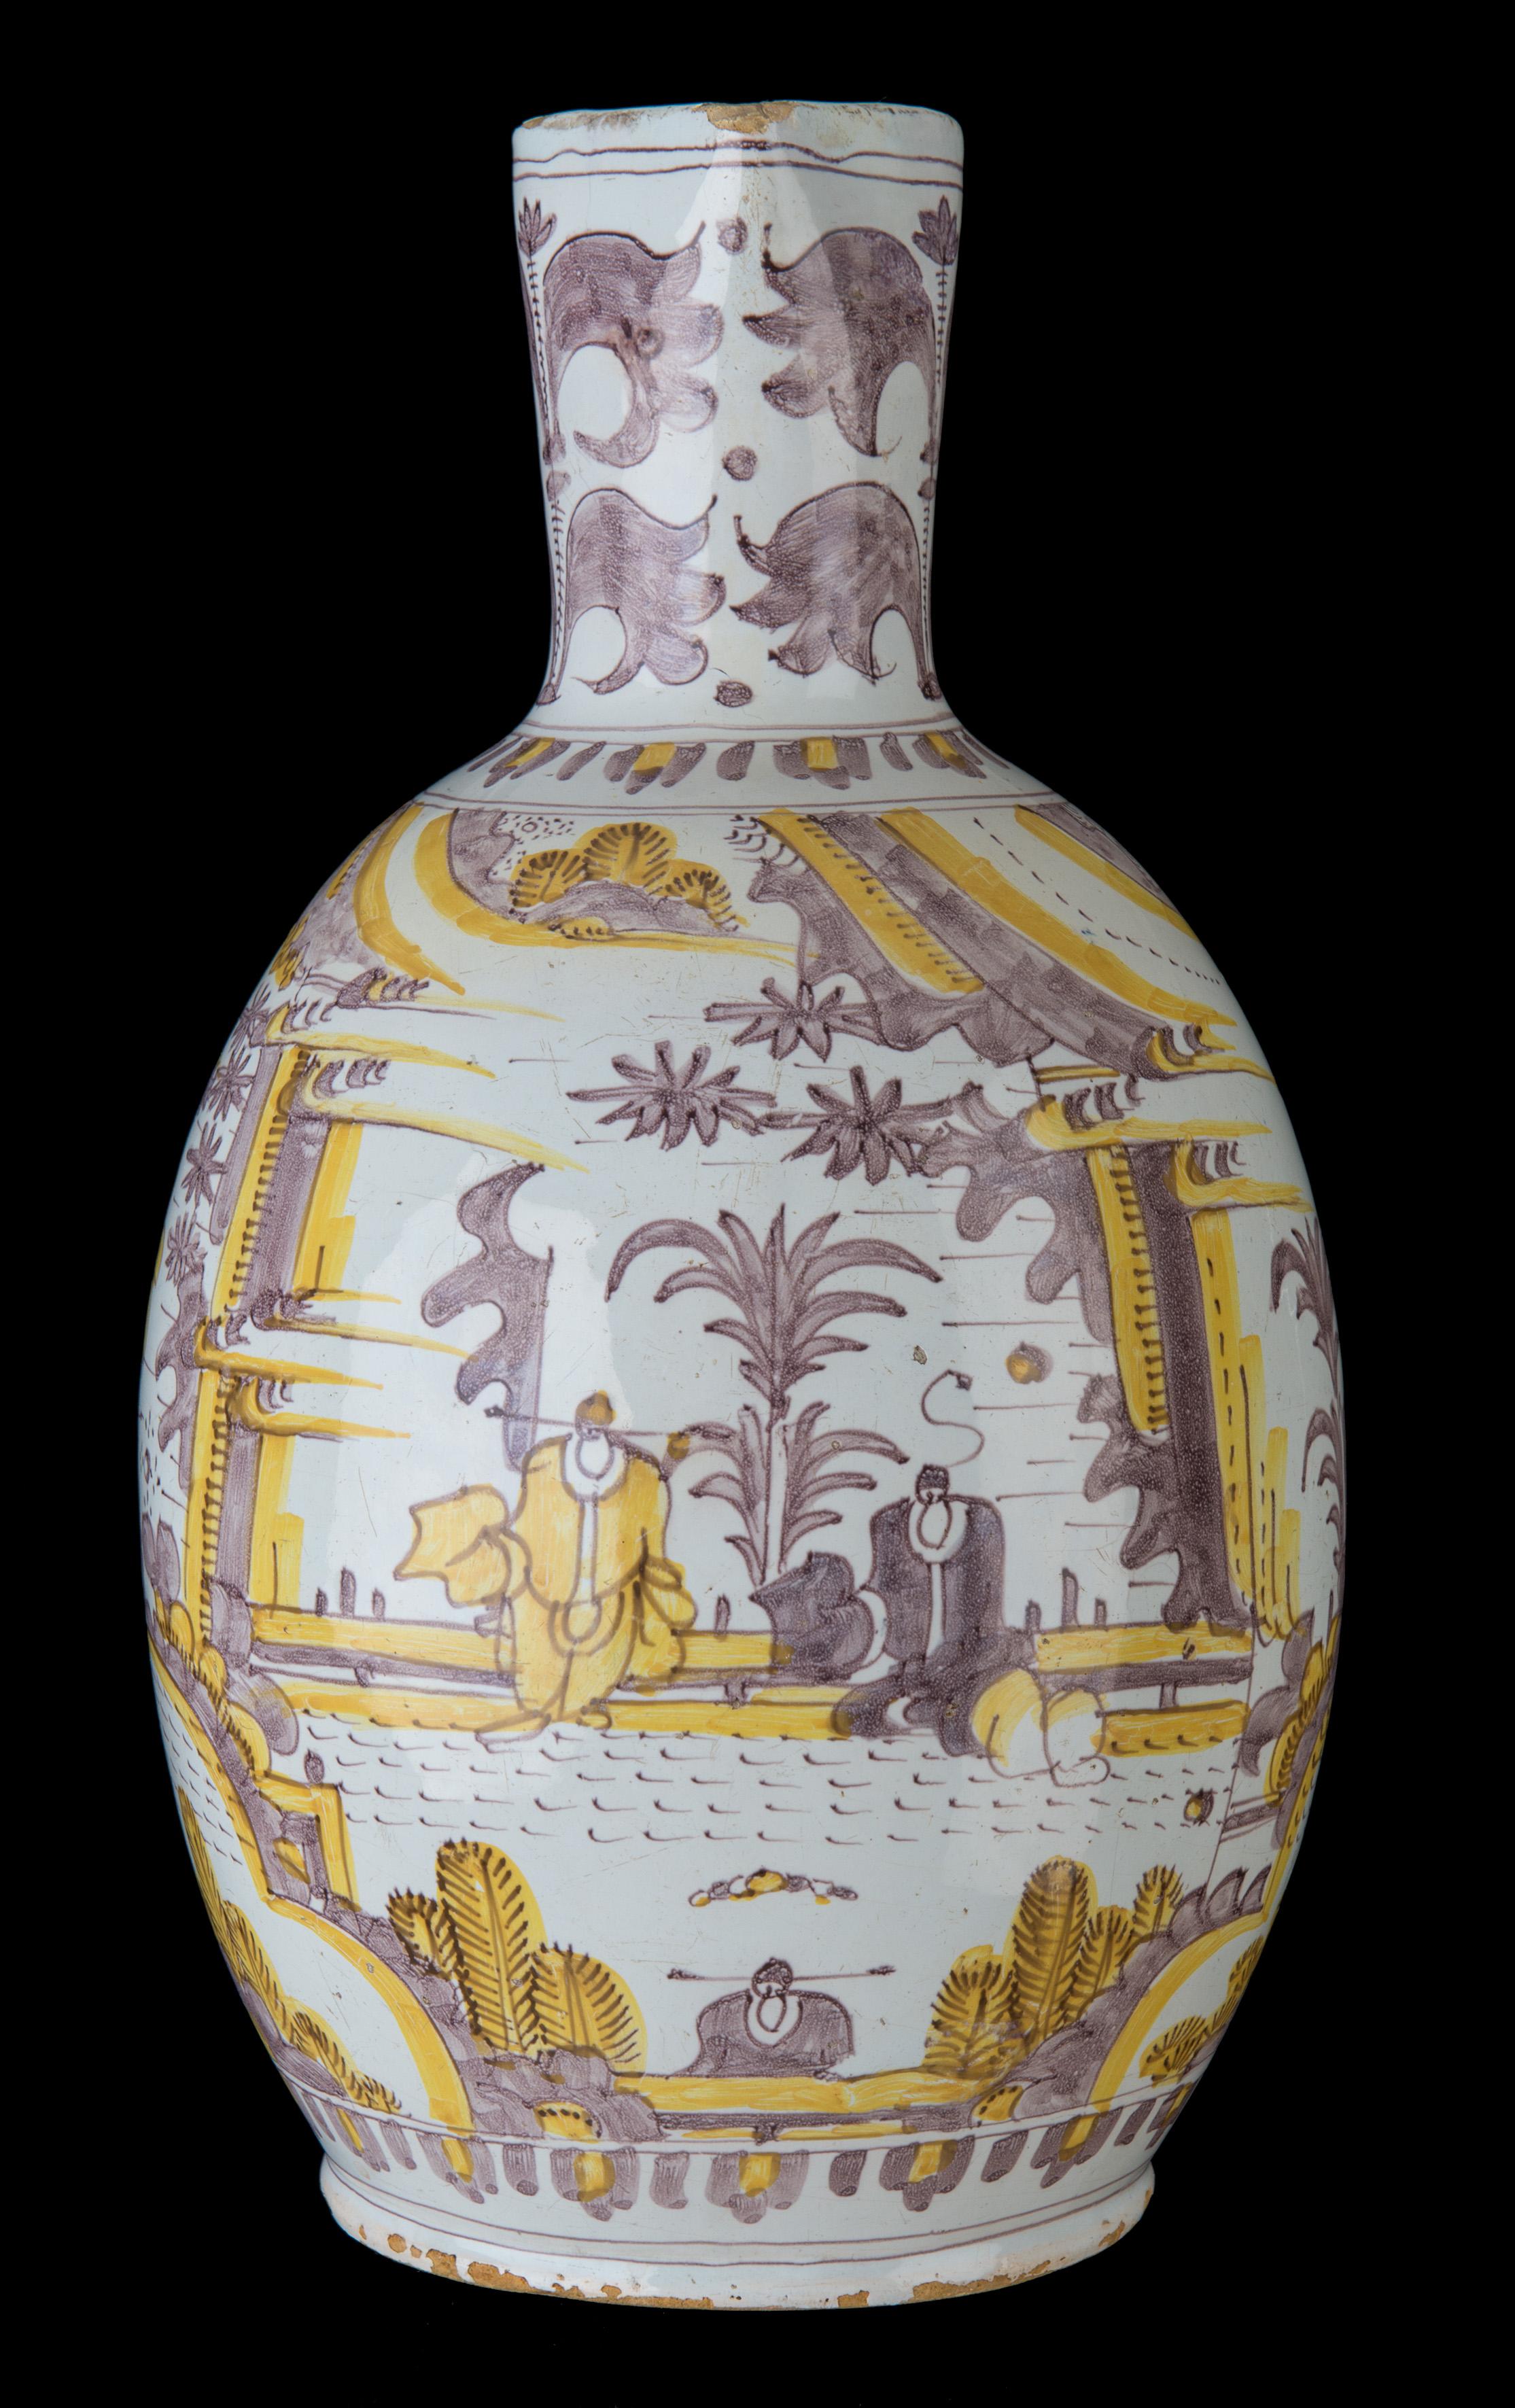 Purple and yellow chinoiserie jug. Delft, circa 1680 - 1700

The ovoid jug stands on a lightly spreading foot and has a tapered neck with spout. The top of the handle is pierced for a metal mount. The jug is painted in purple and yellow with a